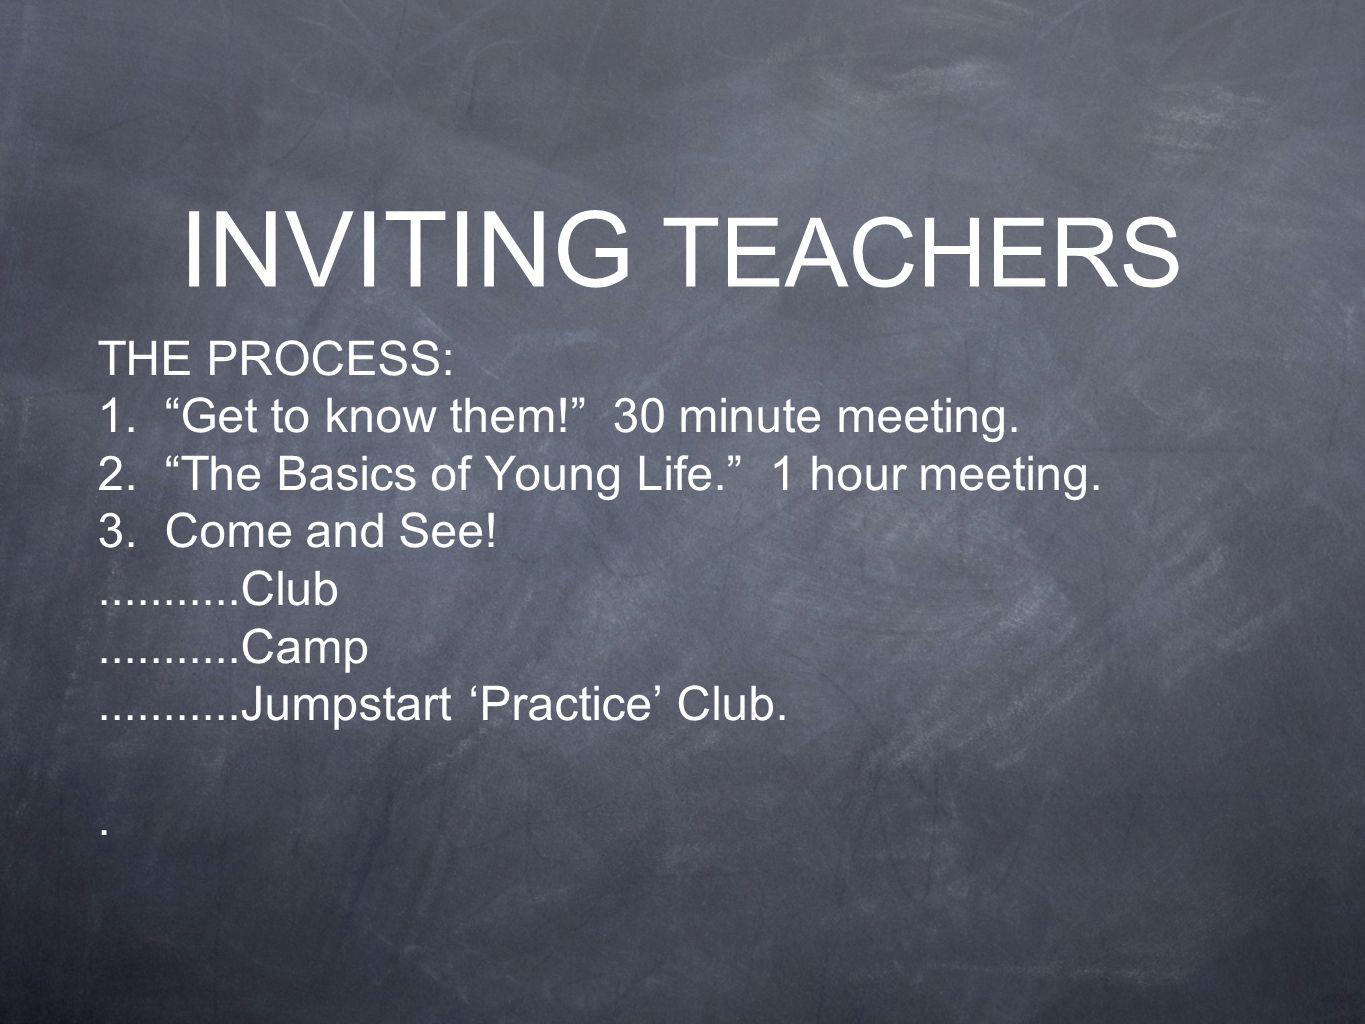 THE PROCESS: 1. Get to know them. 30 minute meeting.